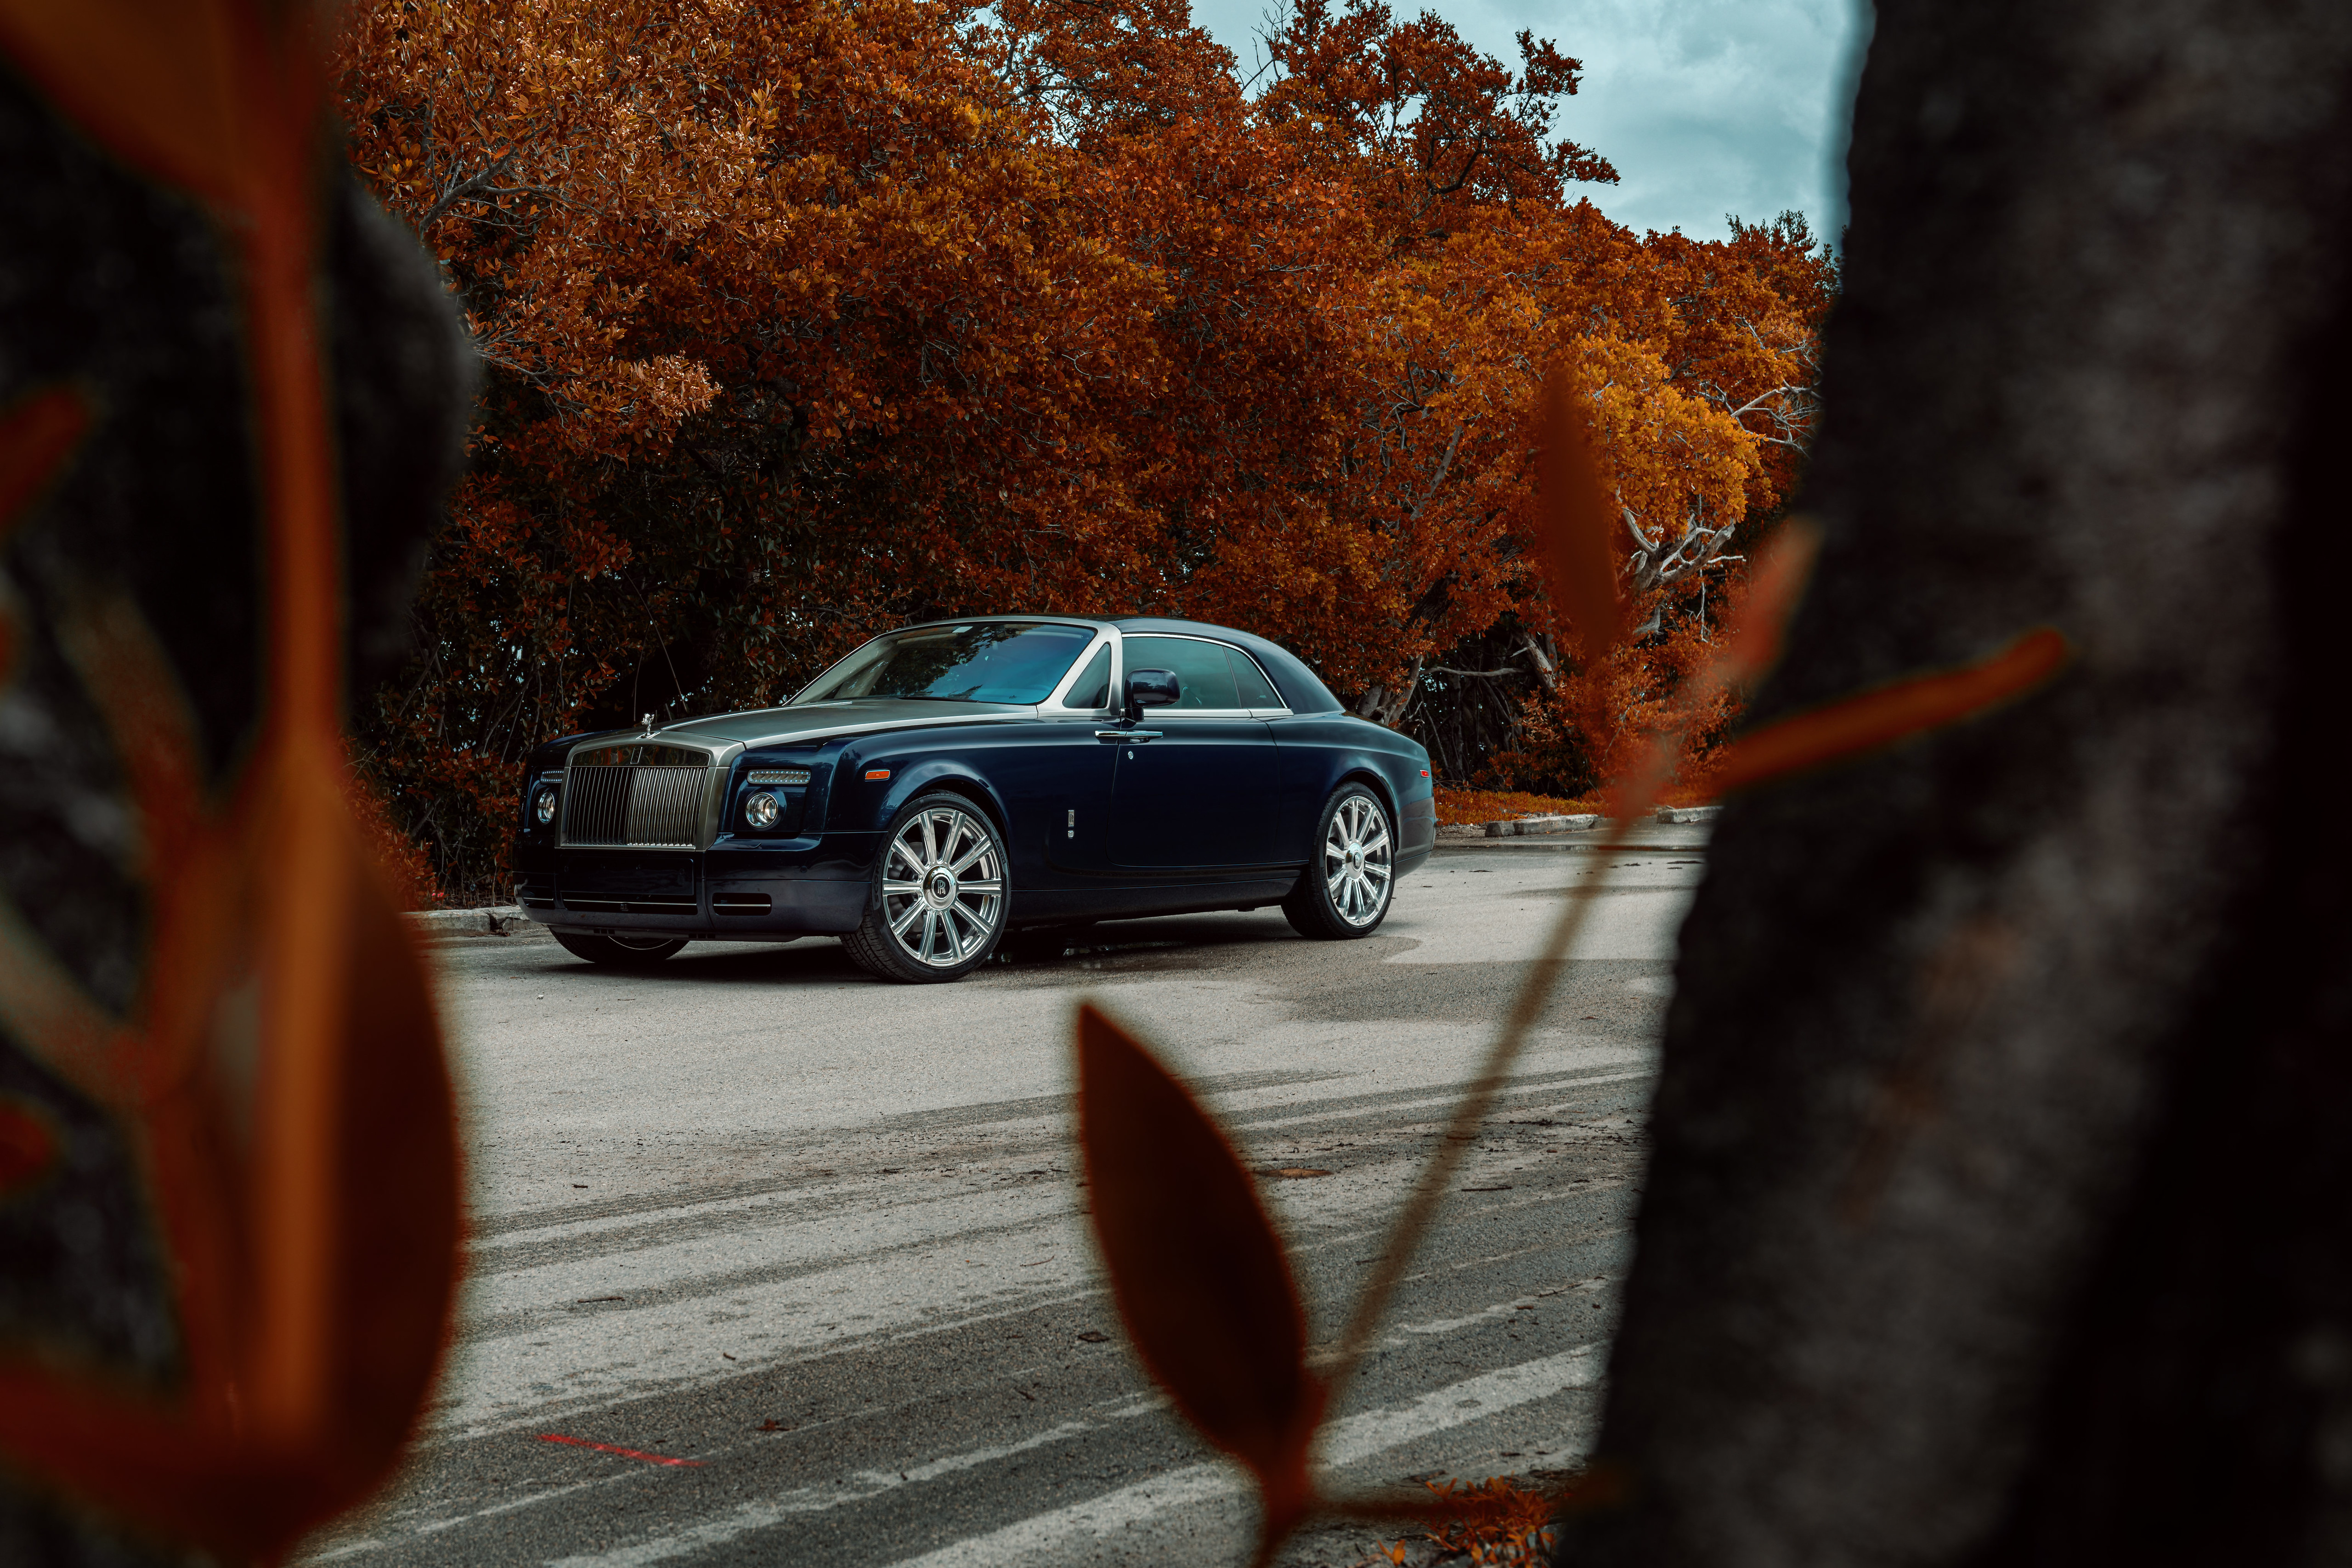 Rolls Royce Rolls Royce Phantom Rolls Royce Phantom 12 Luxury Cars Trees Fall Outdoors 5120x3414